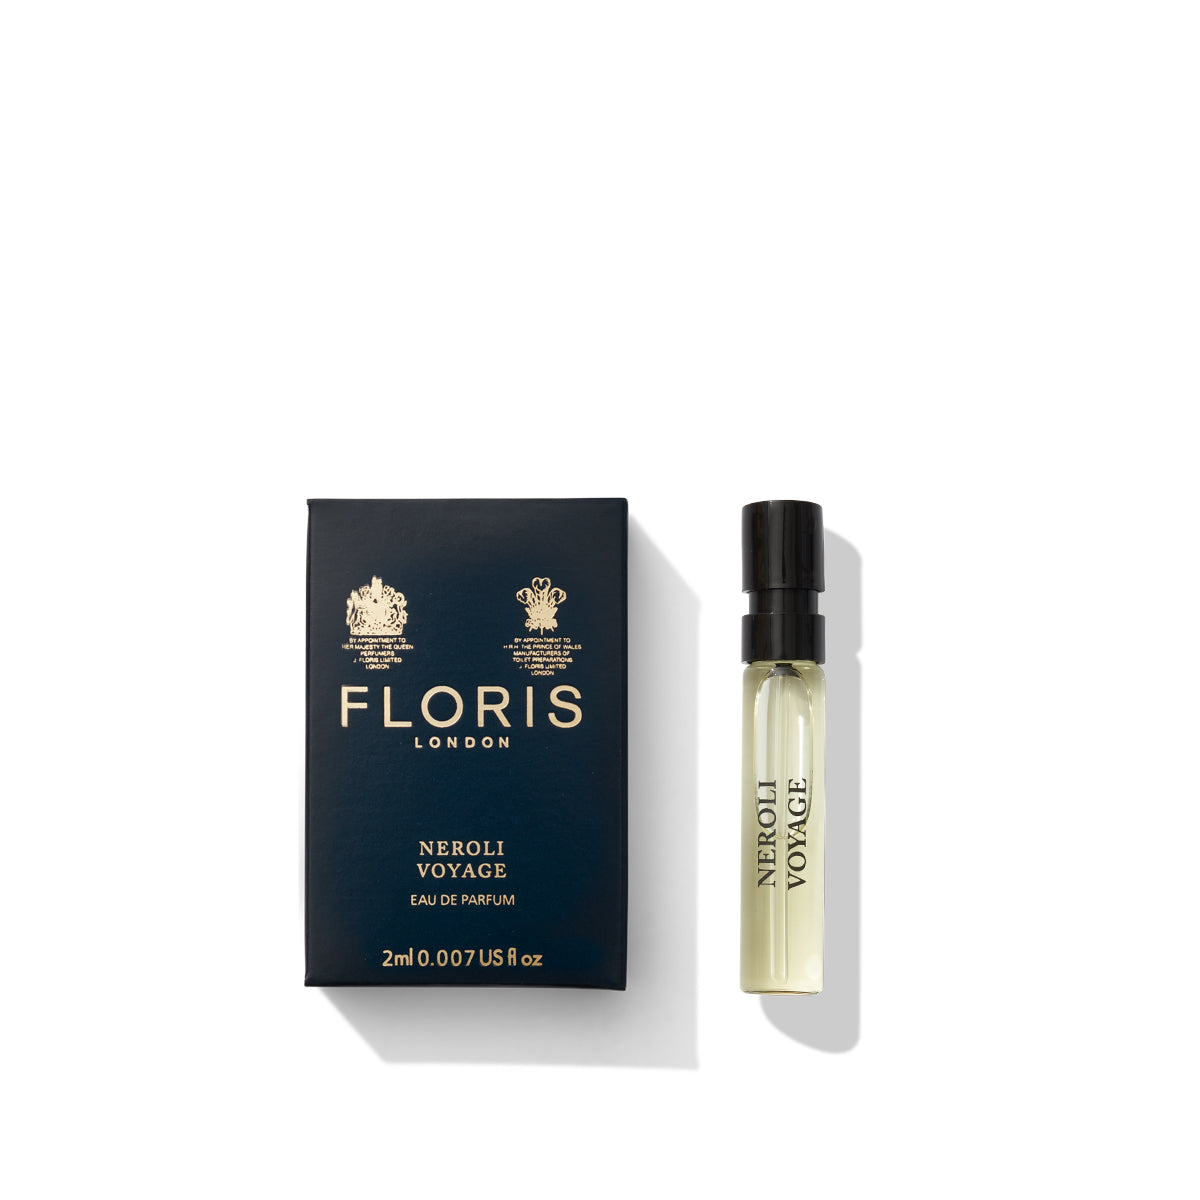 Neroli Voyage - Eau de Parfum by Floris London, a citrus marine fragrance, showcased in a sample vial with its matching dark blue box against a white background.